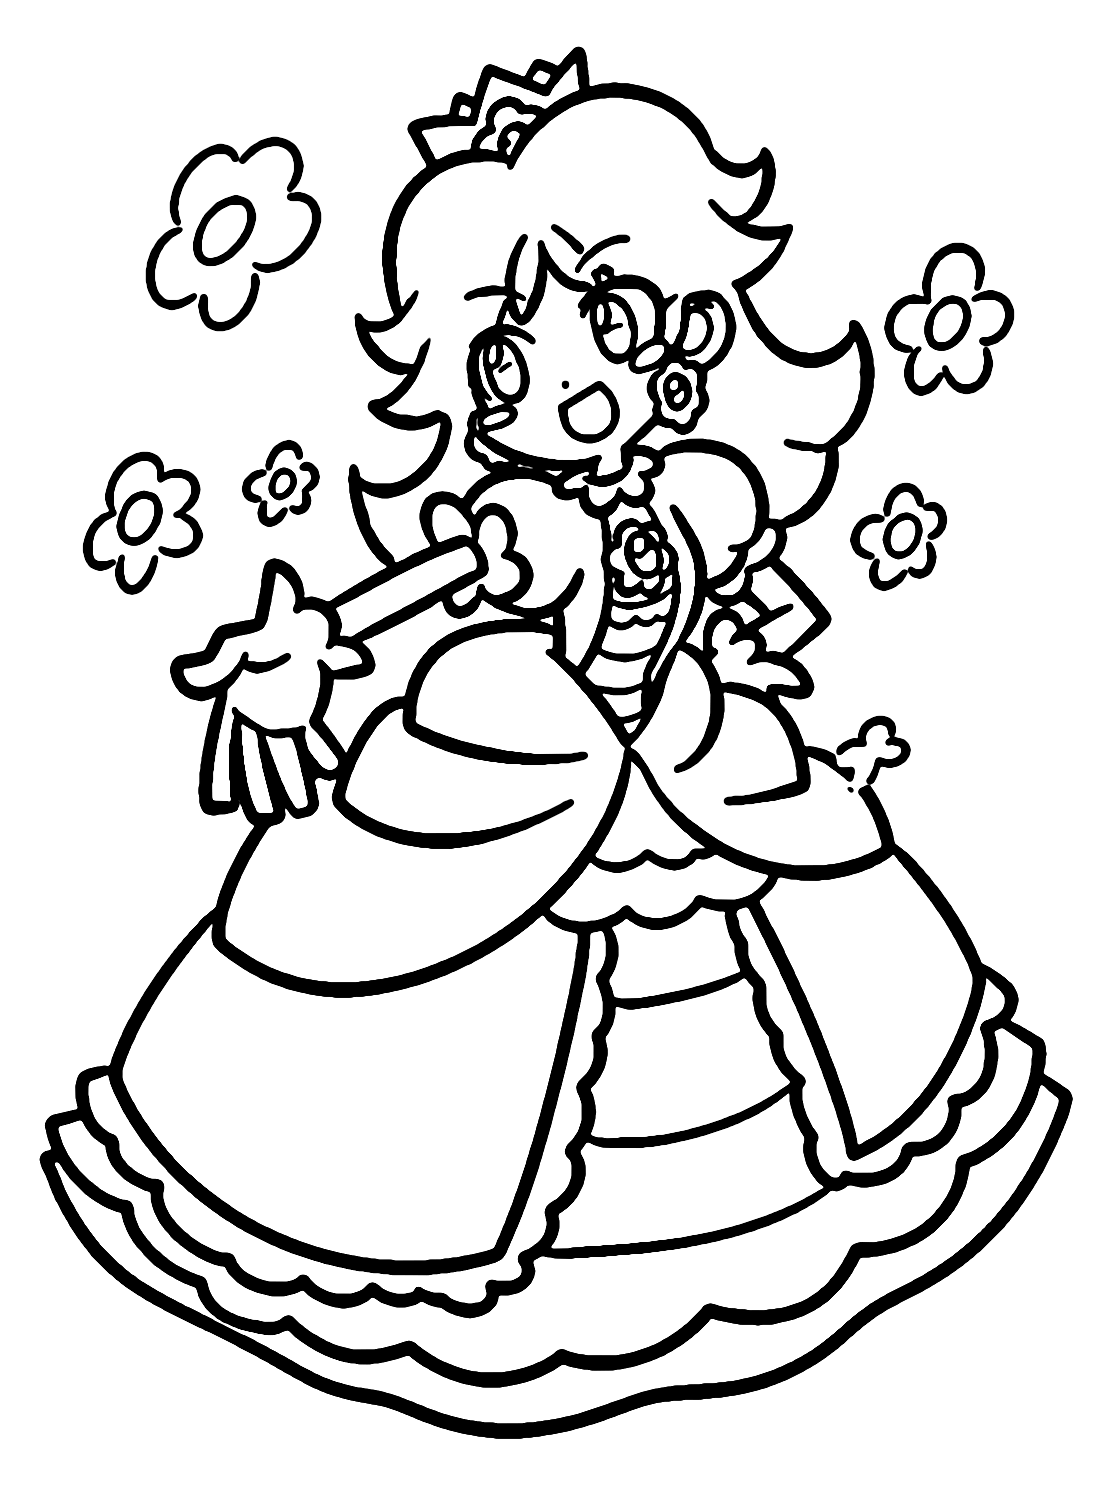 Lovely Daisy from Super Mario Coloring Pages